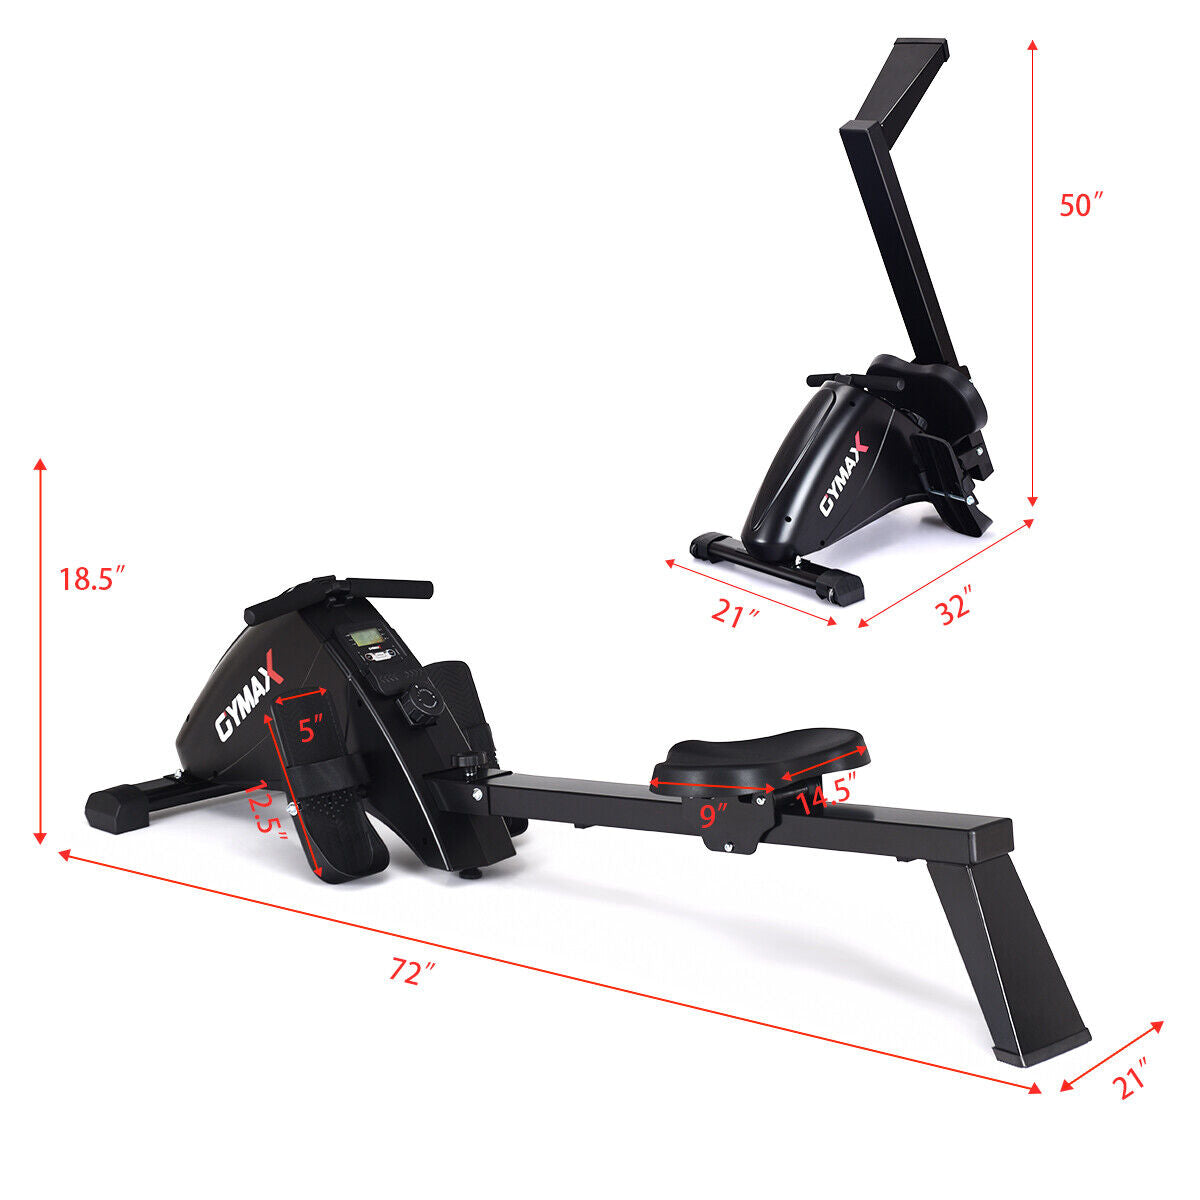 Rowing Machine Fitness Equipment - Resistance System Exercise Bike